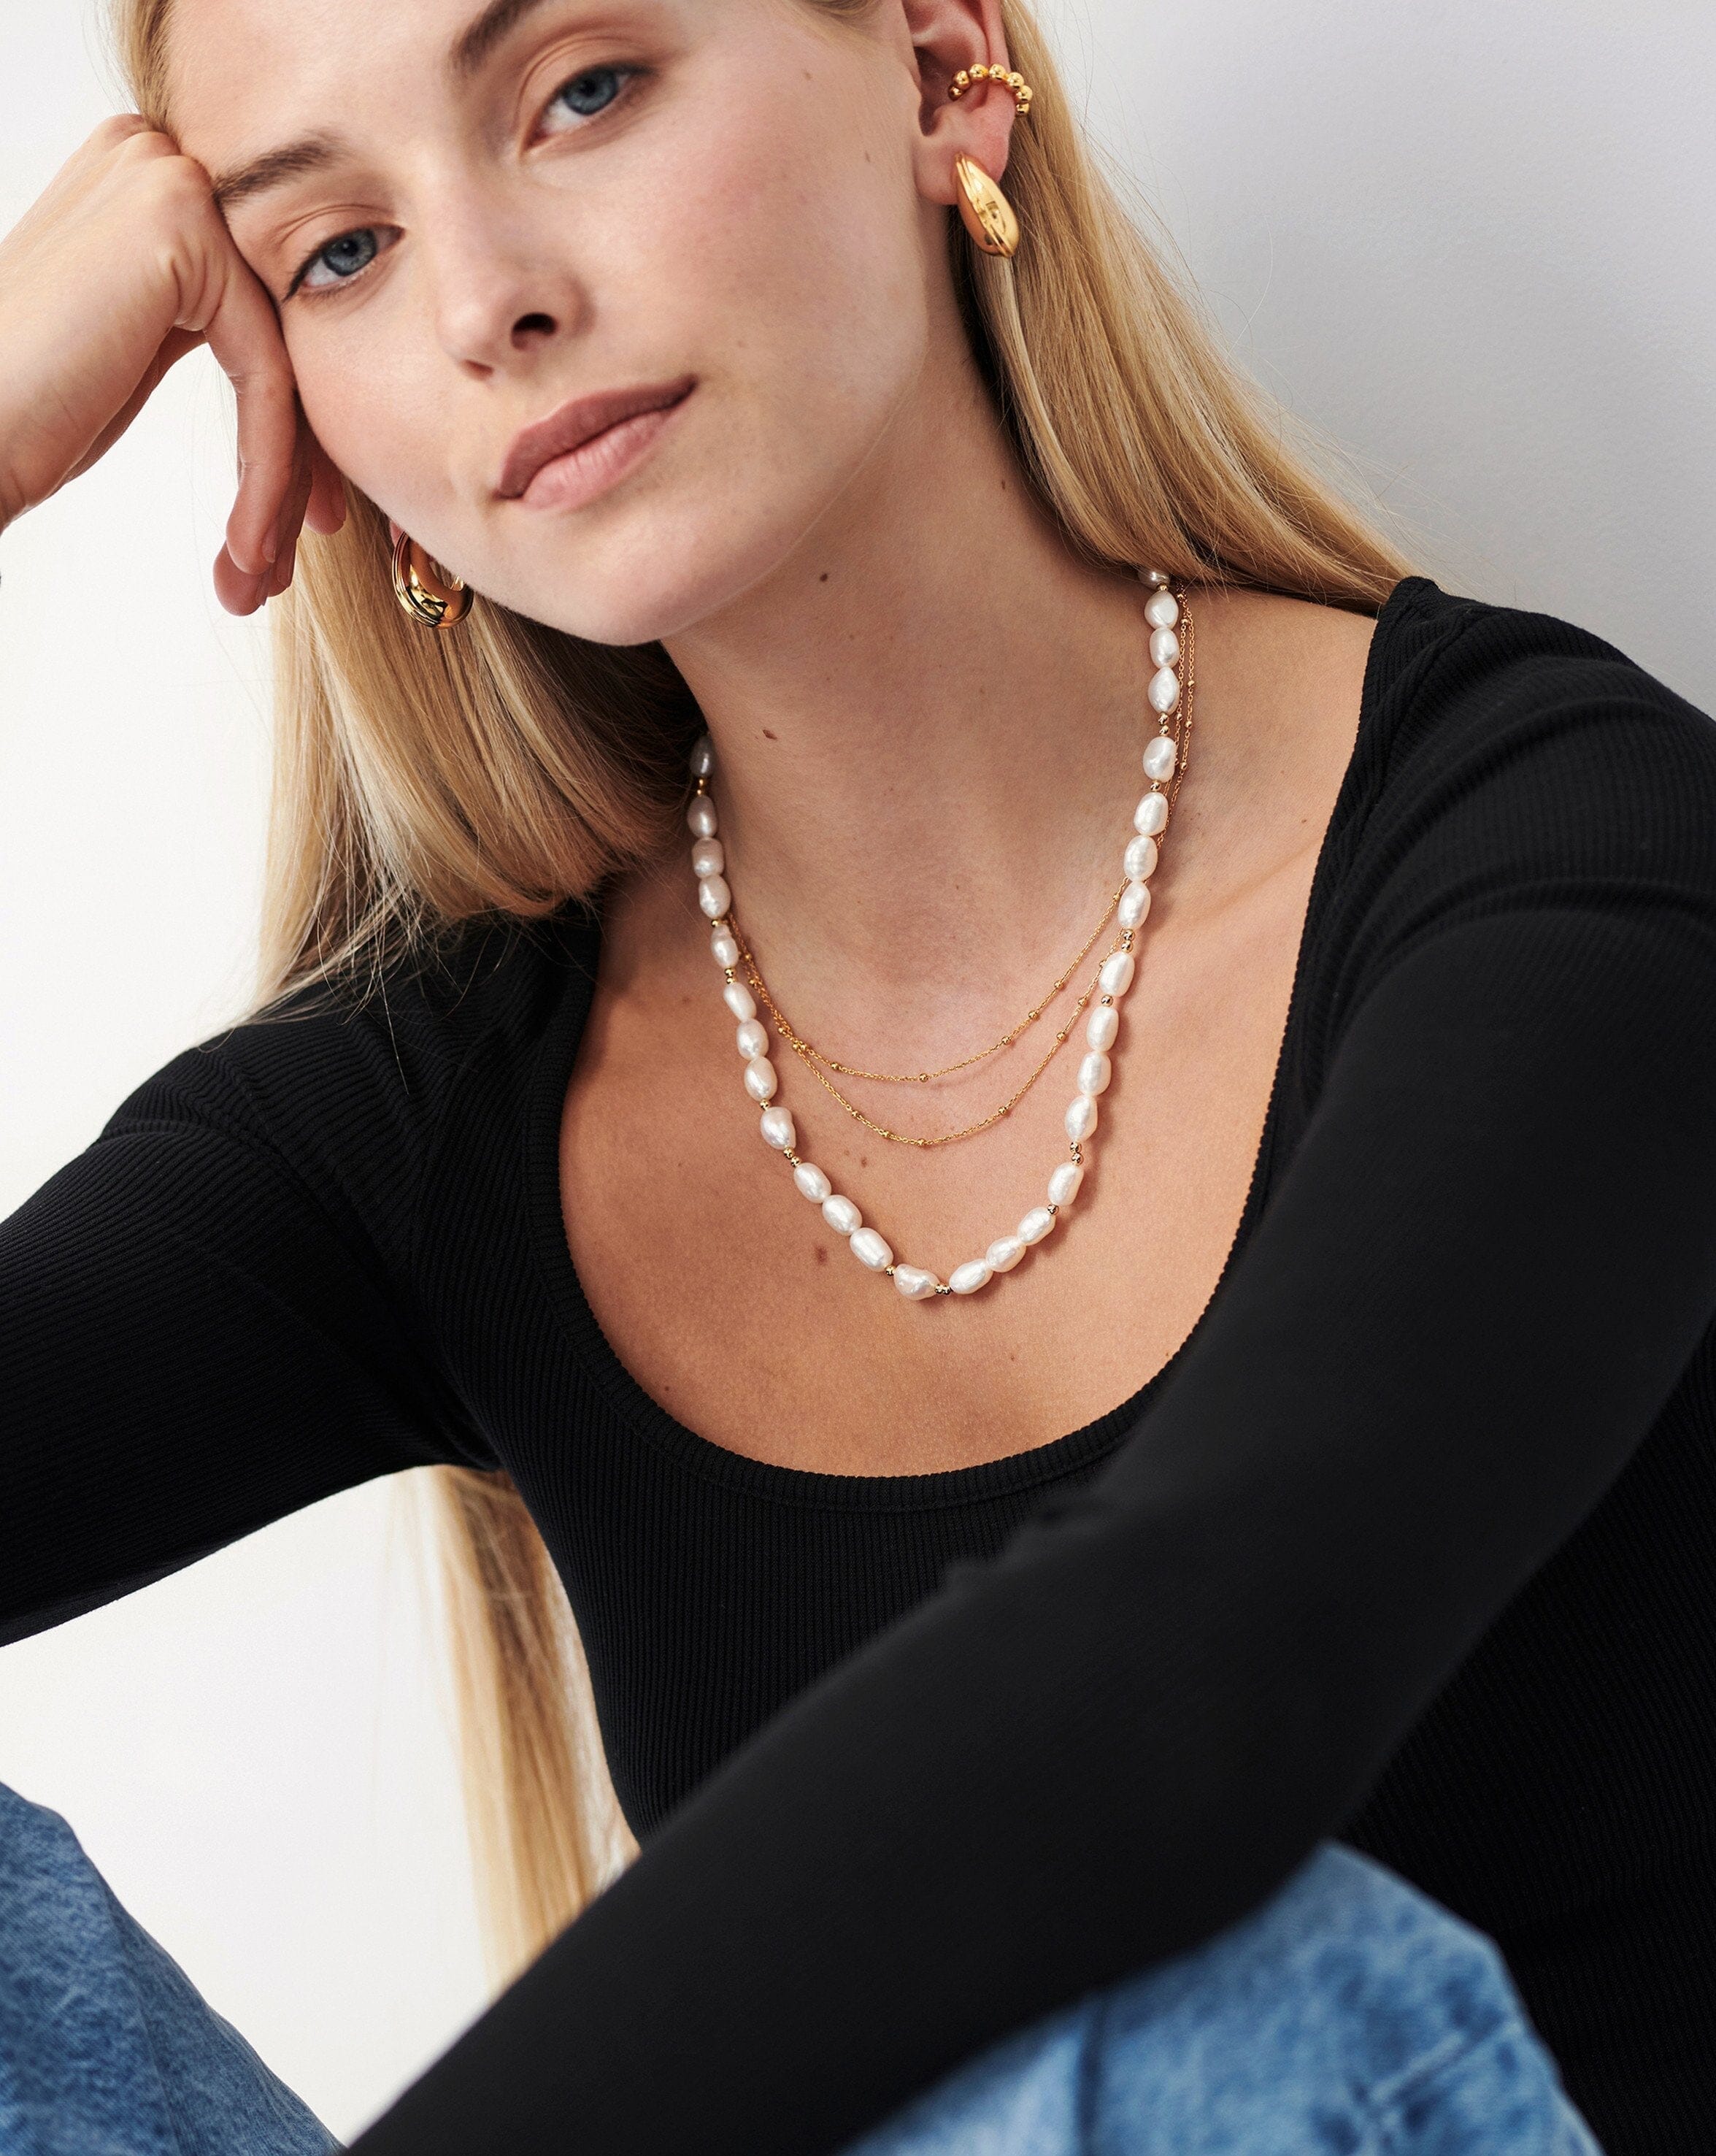 Small pearly bead necklace